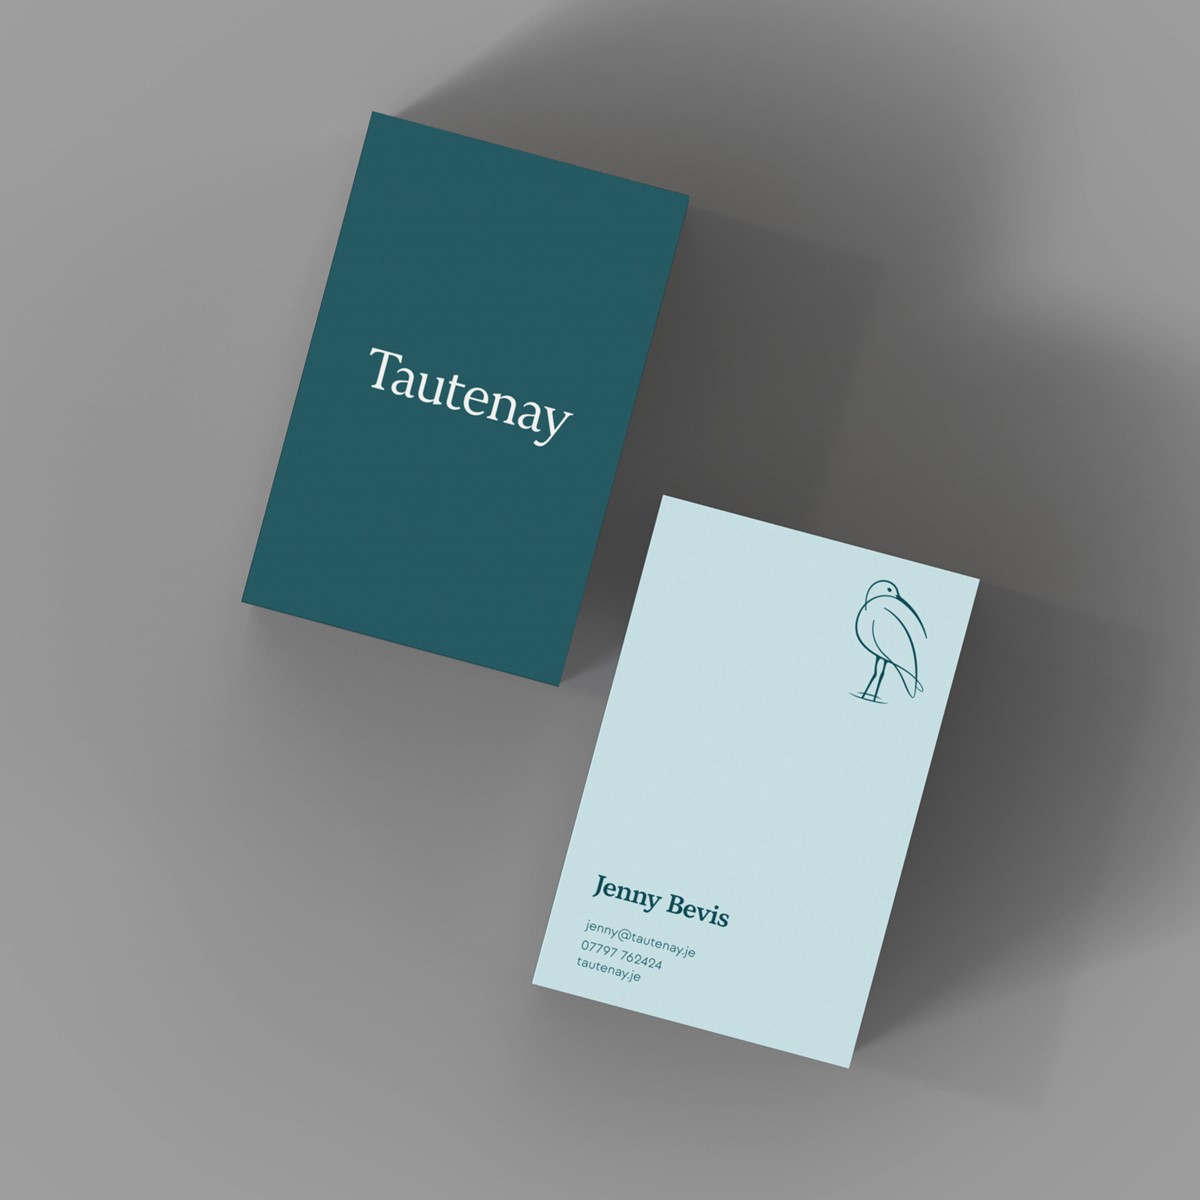 Tautenay. Business card mock-up by design studio Superfried. Manchester.